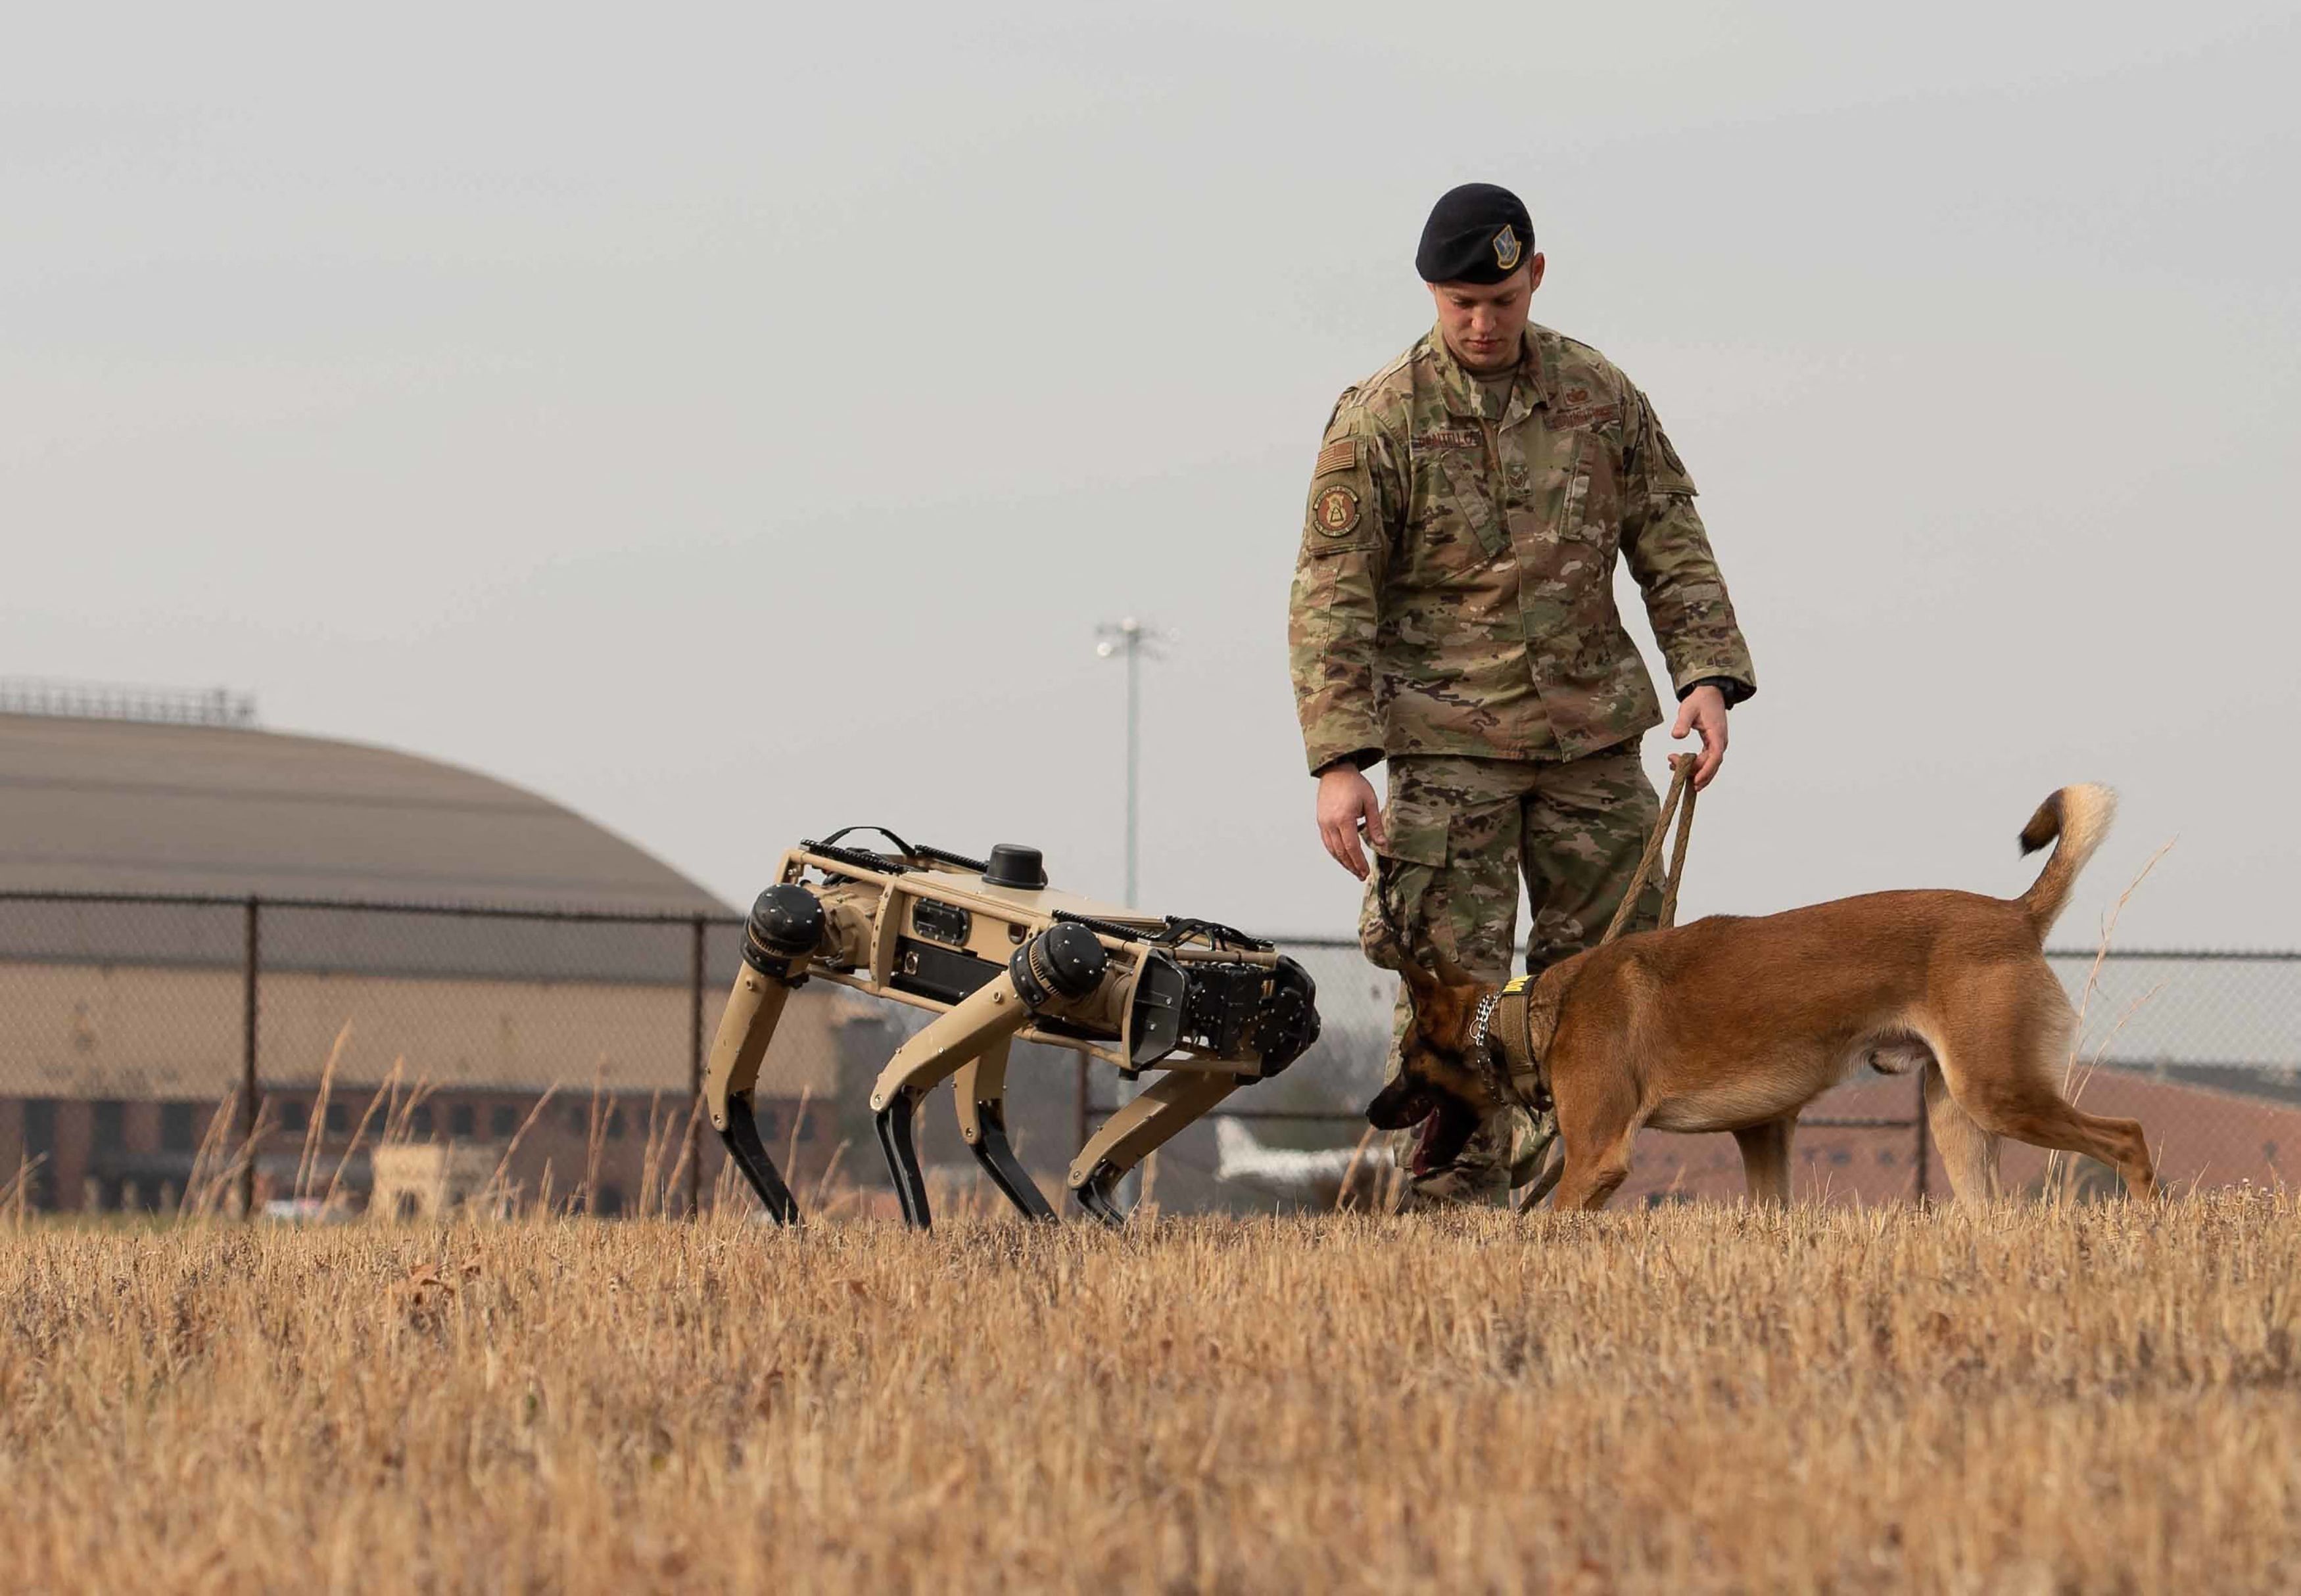 Robot dogs could patrol the US-Mexico border | CNN